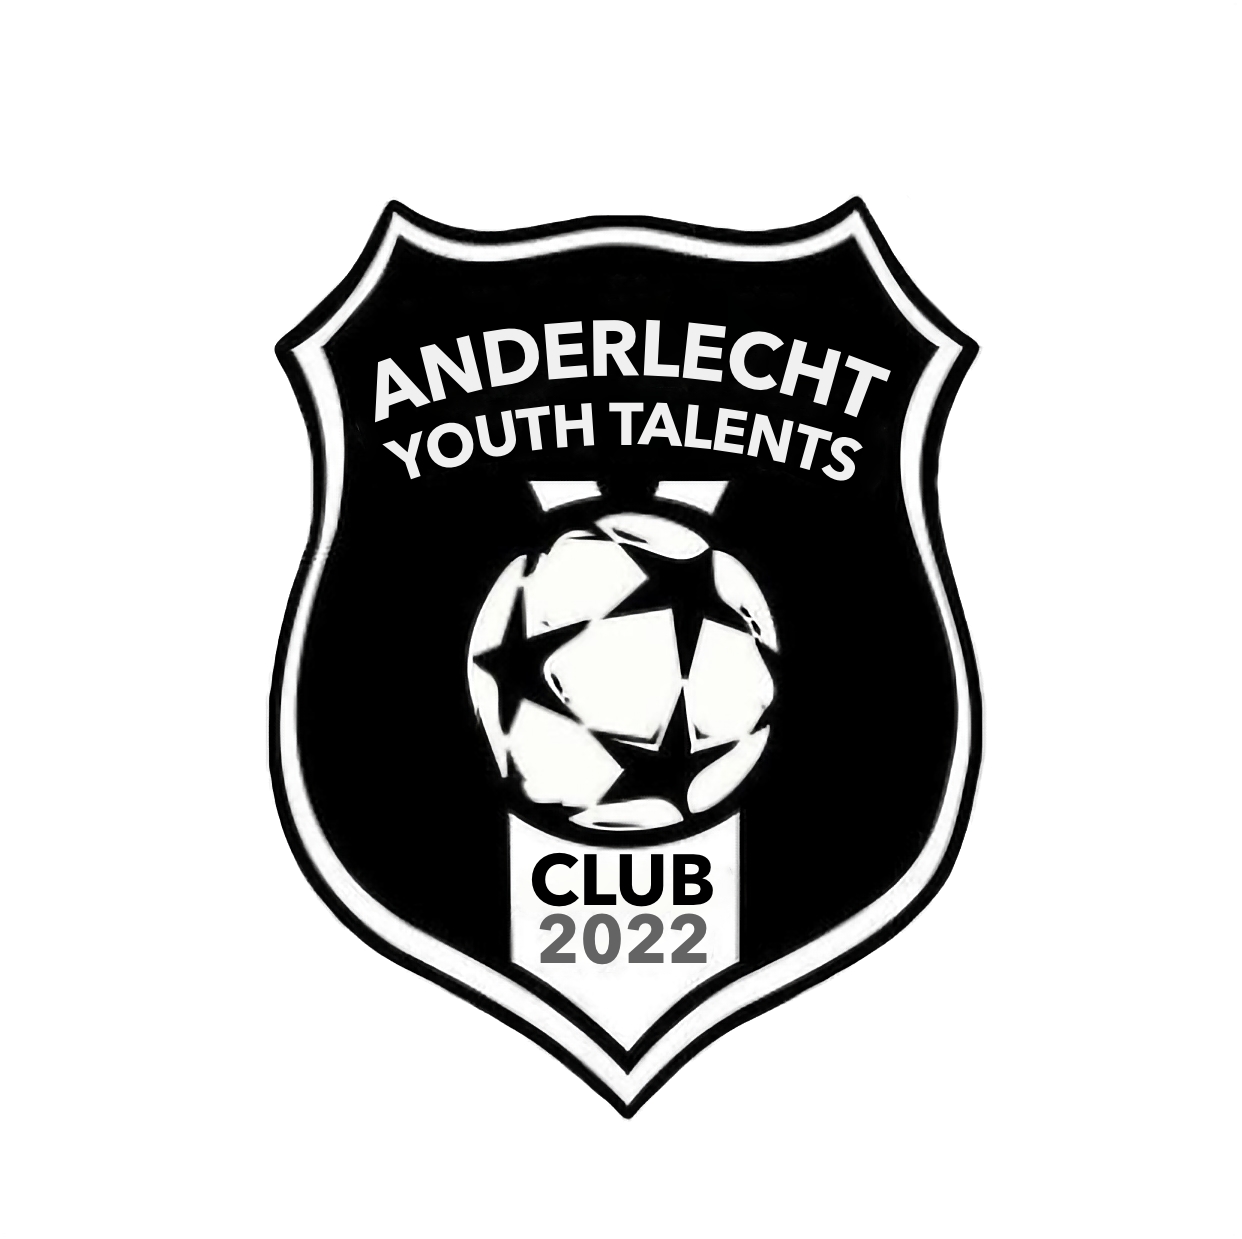 7 - Anderlecht Youth Talents